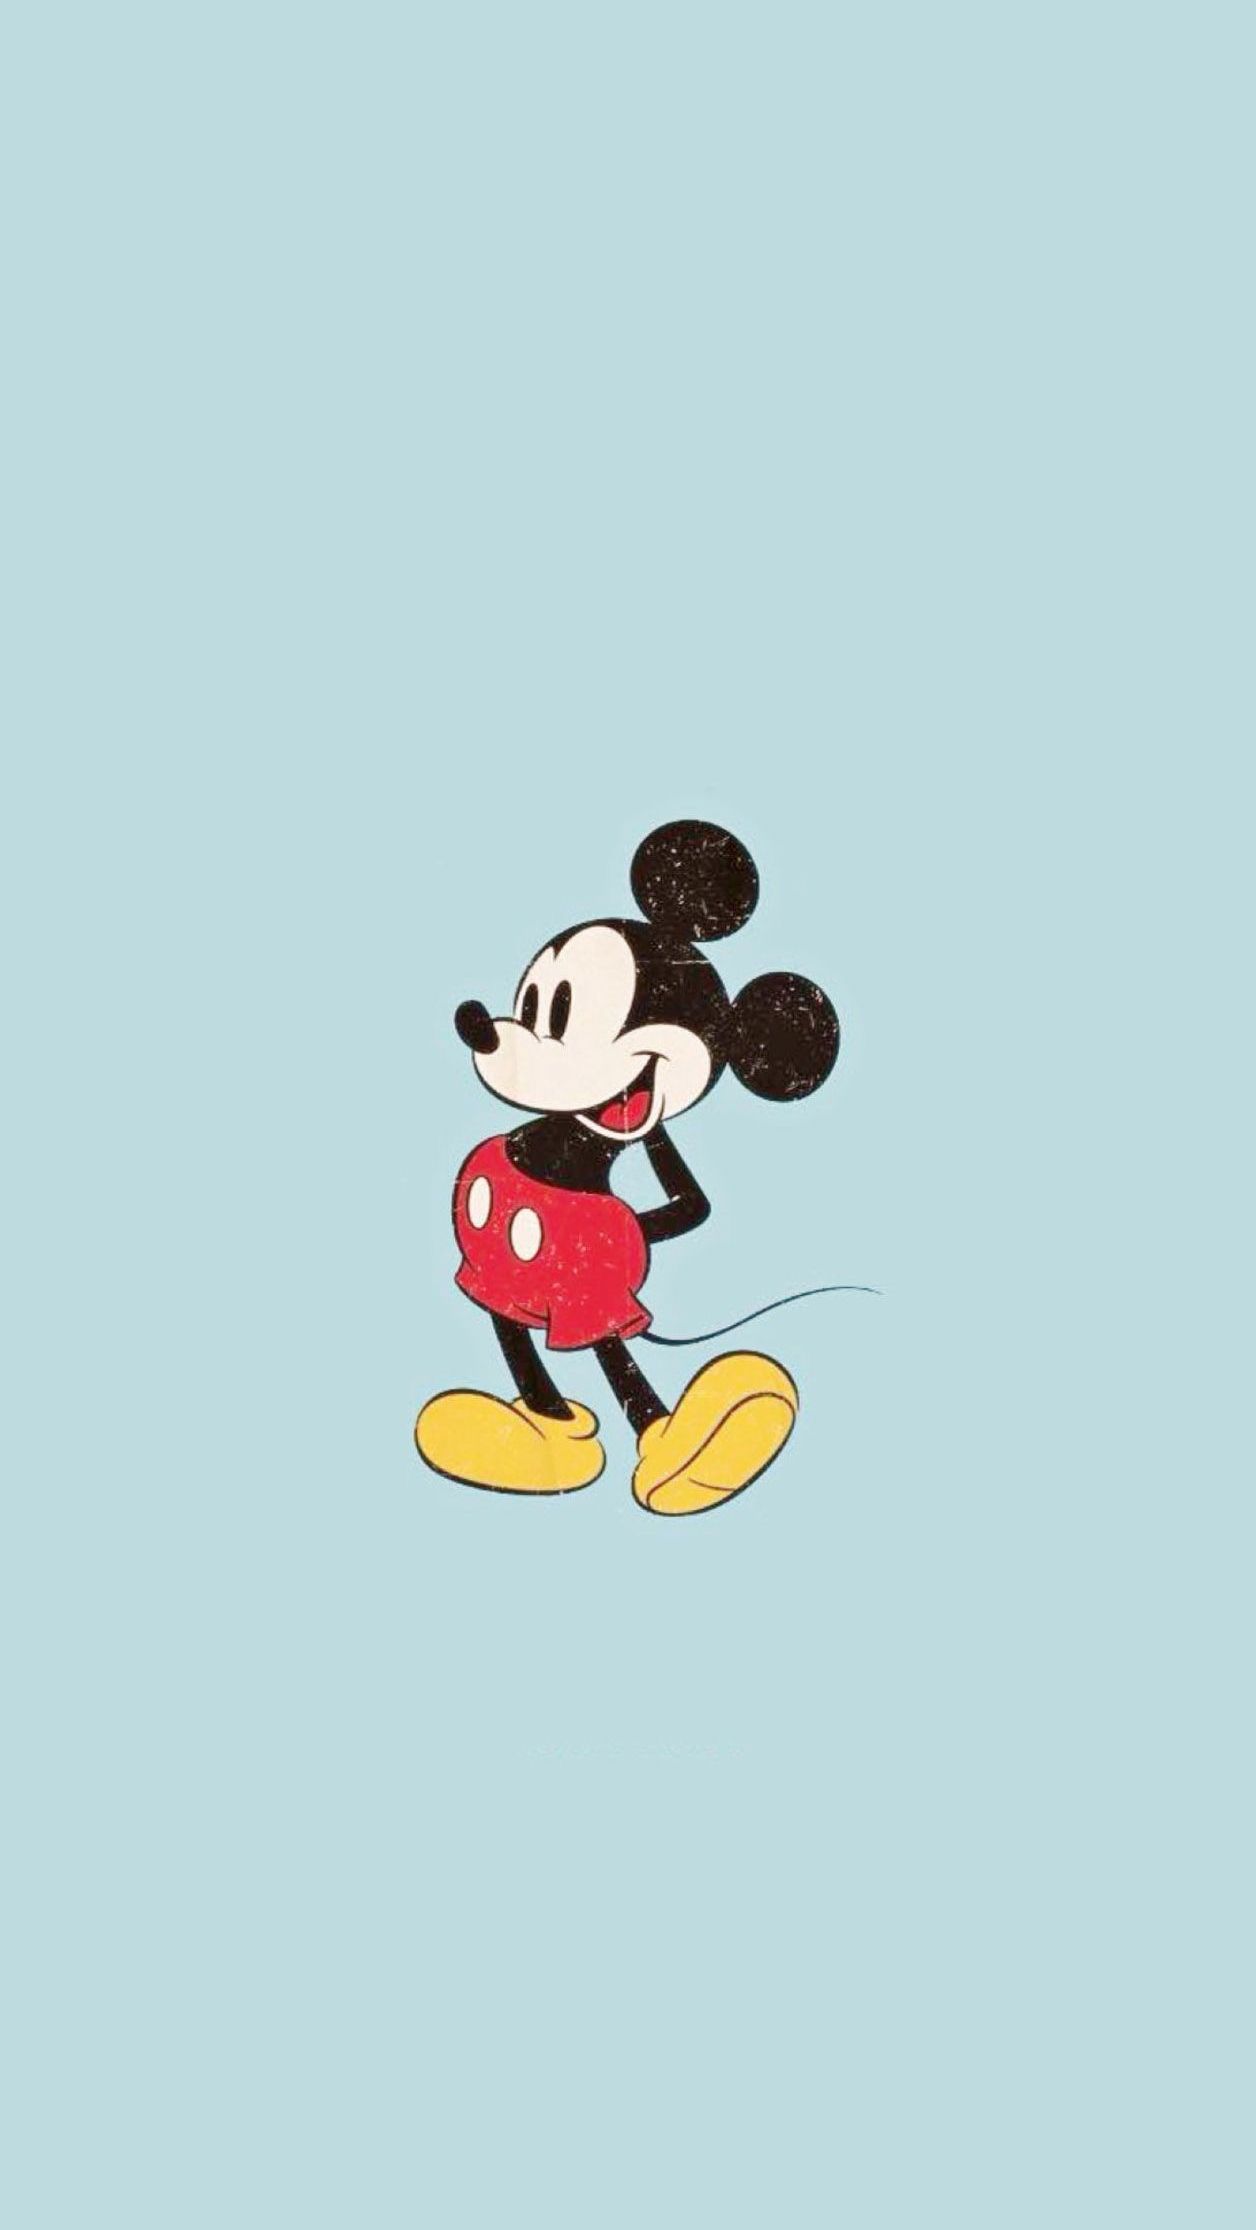 iPhone Wallpaper for iPhone iPhone X and iPhone 7. Cute cartoon wallpaper, Disney phone wallpaper, Wallpaper iphone disney